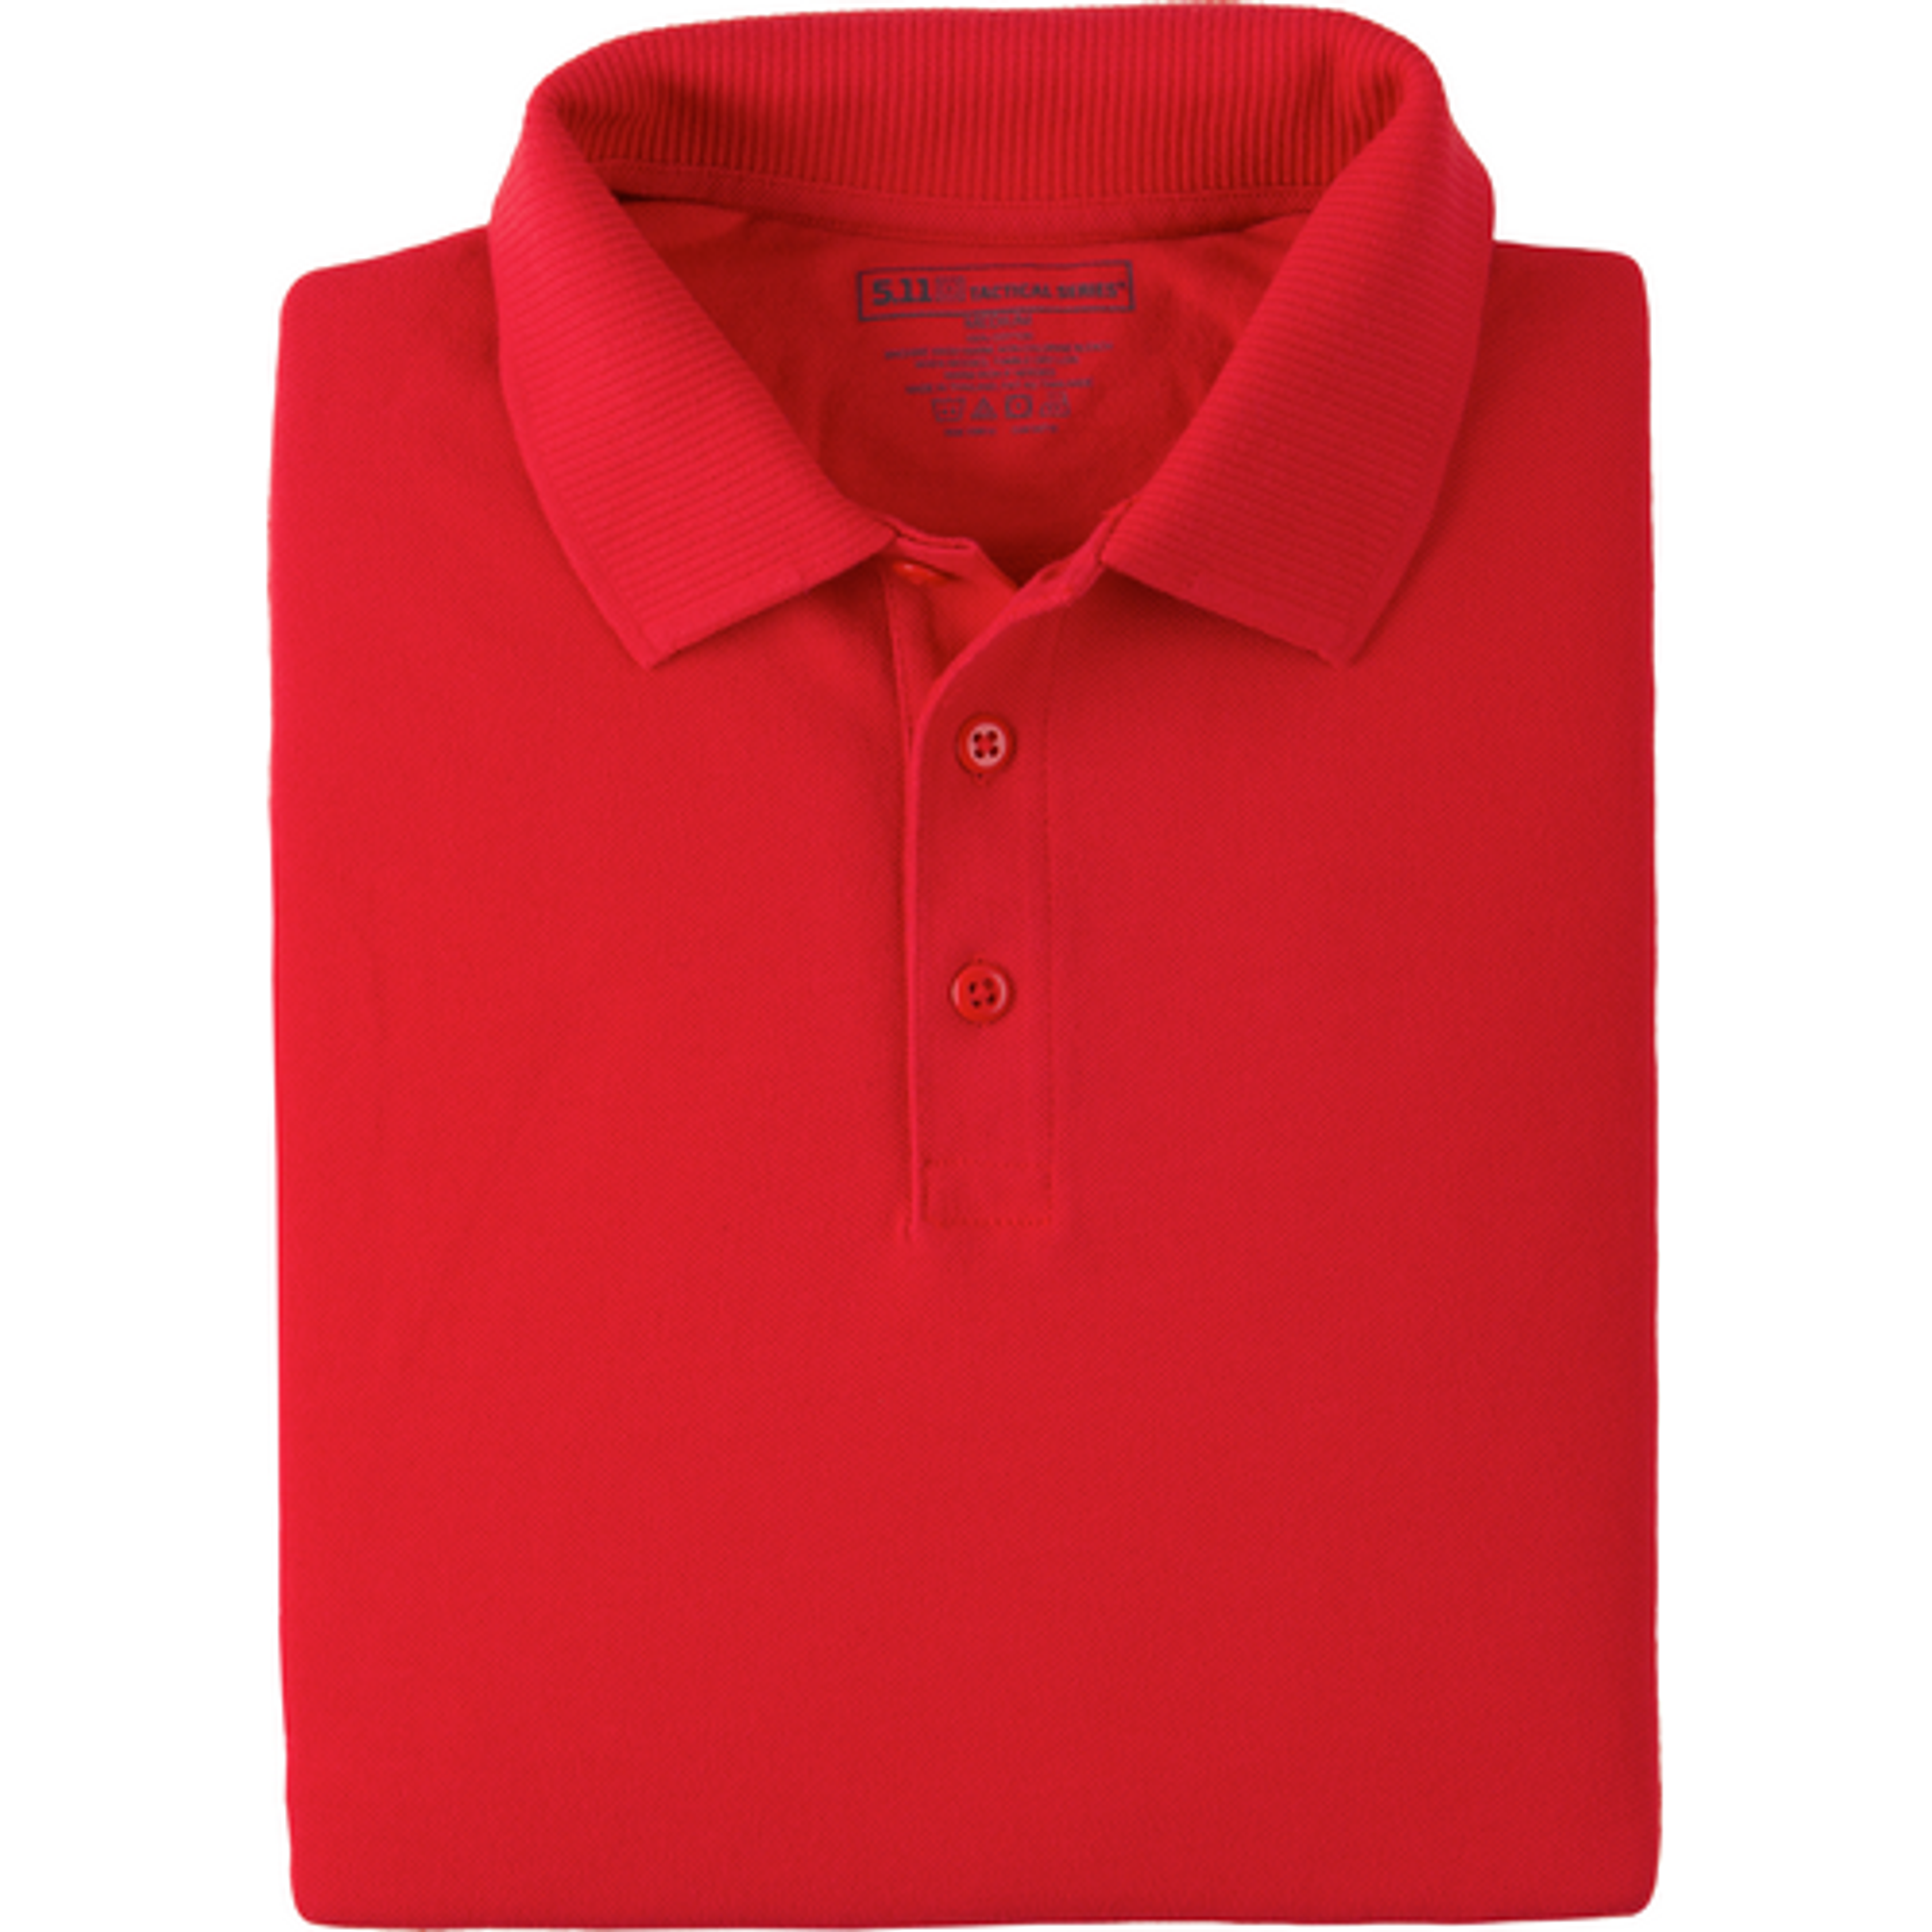 Professional S/s Polo - KR5-41060477XL